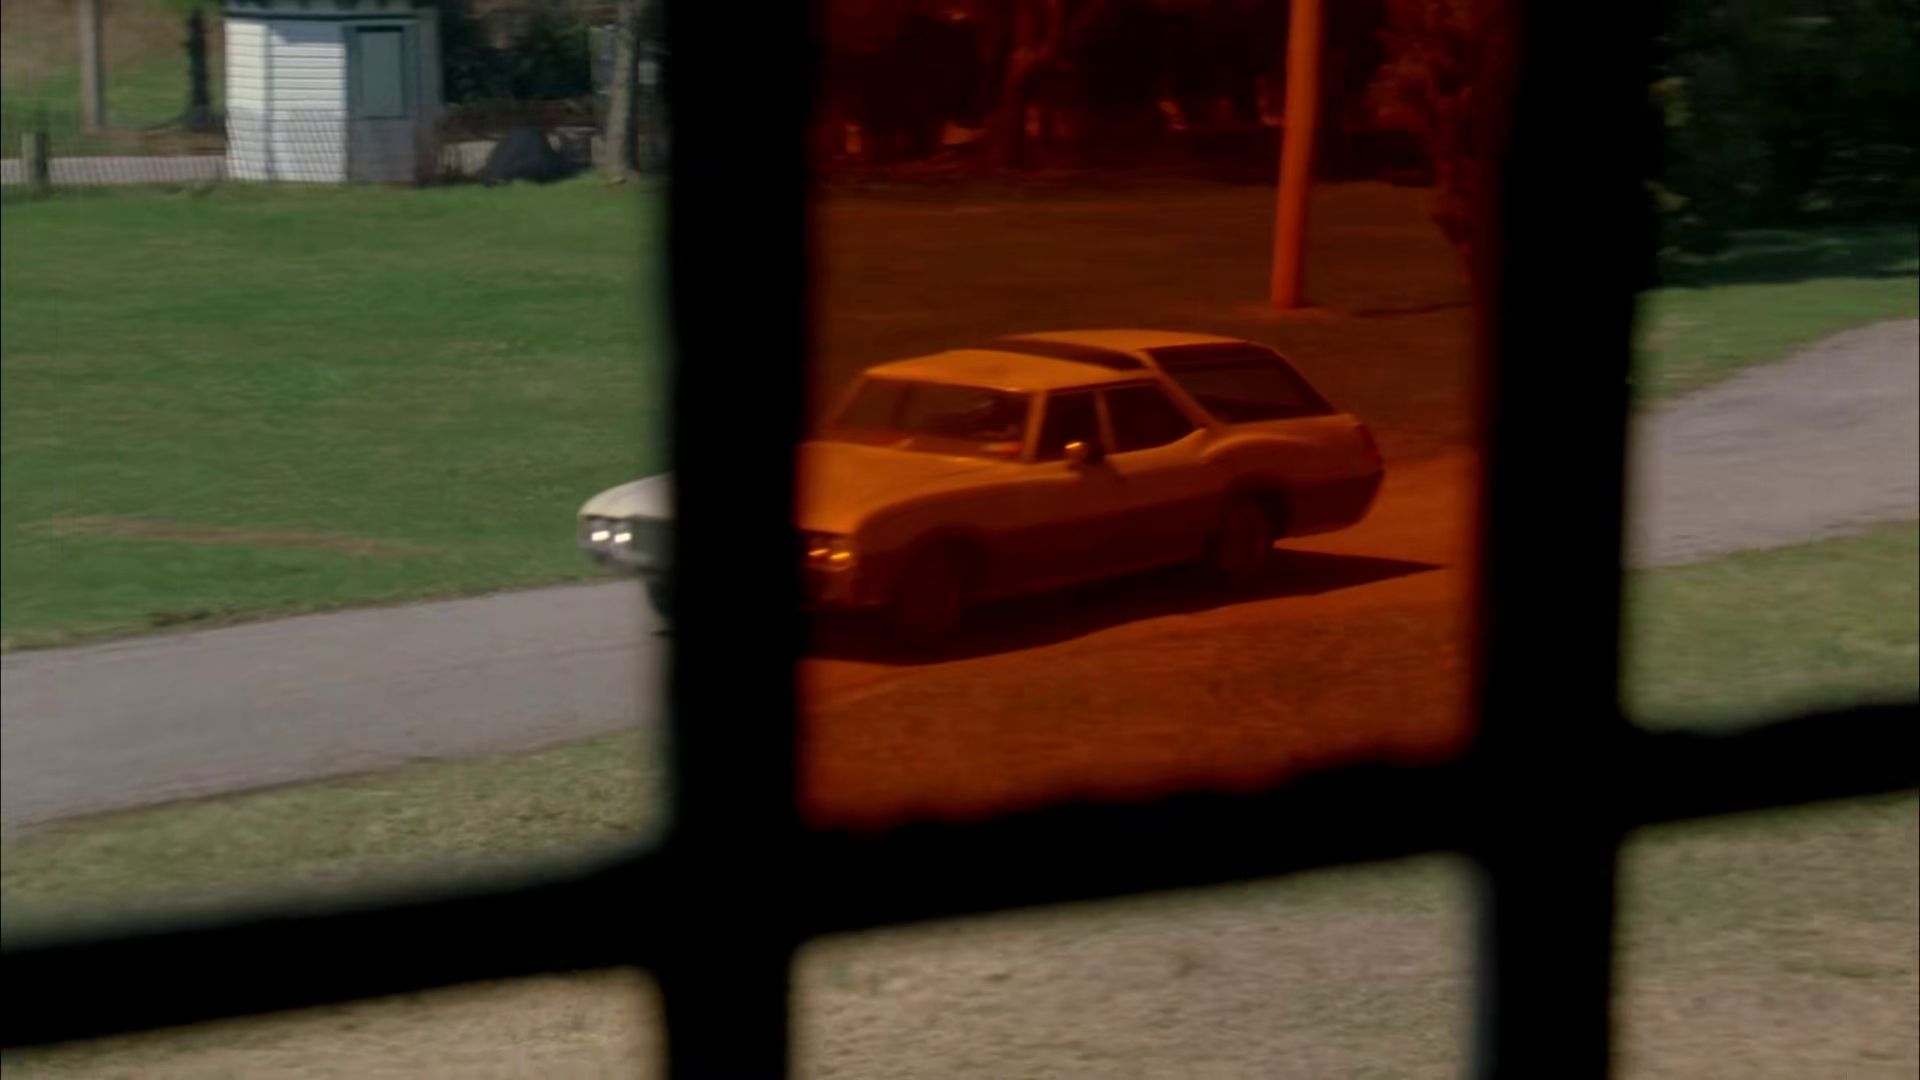 Connection: Peter's car through red glass